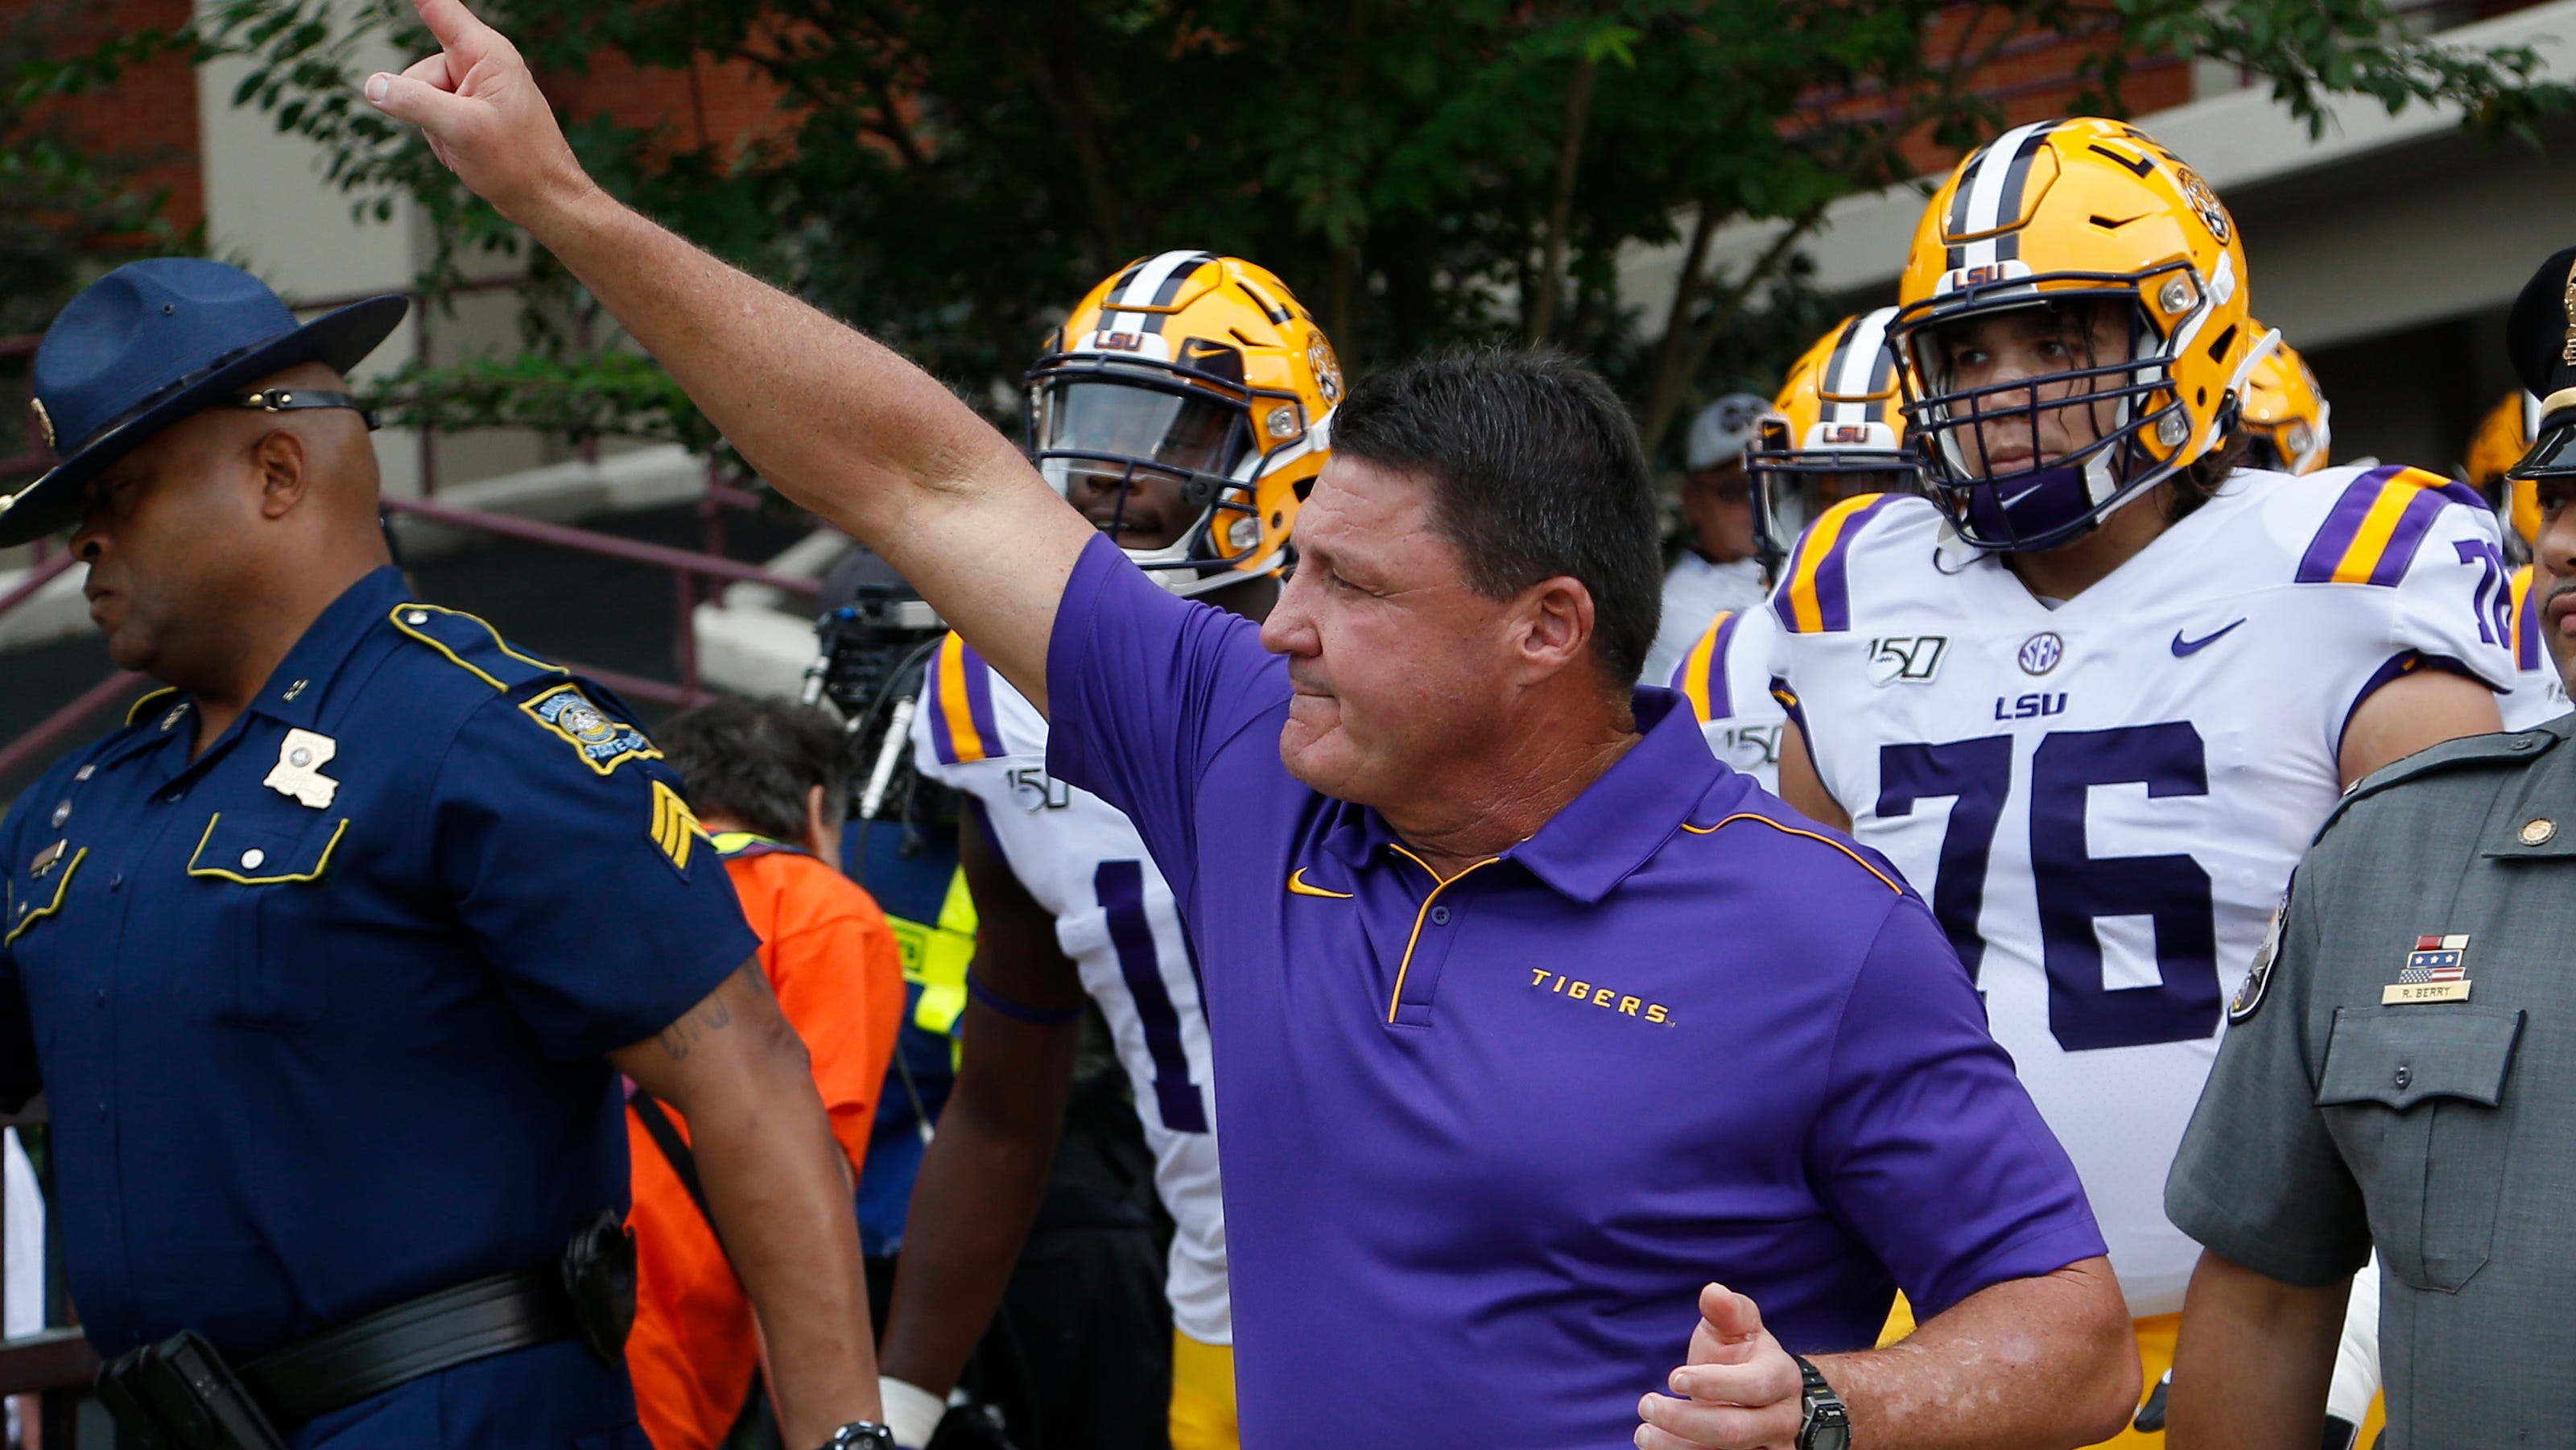 LSU Football Recruiting Tigers are goto program for recruits